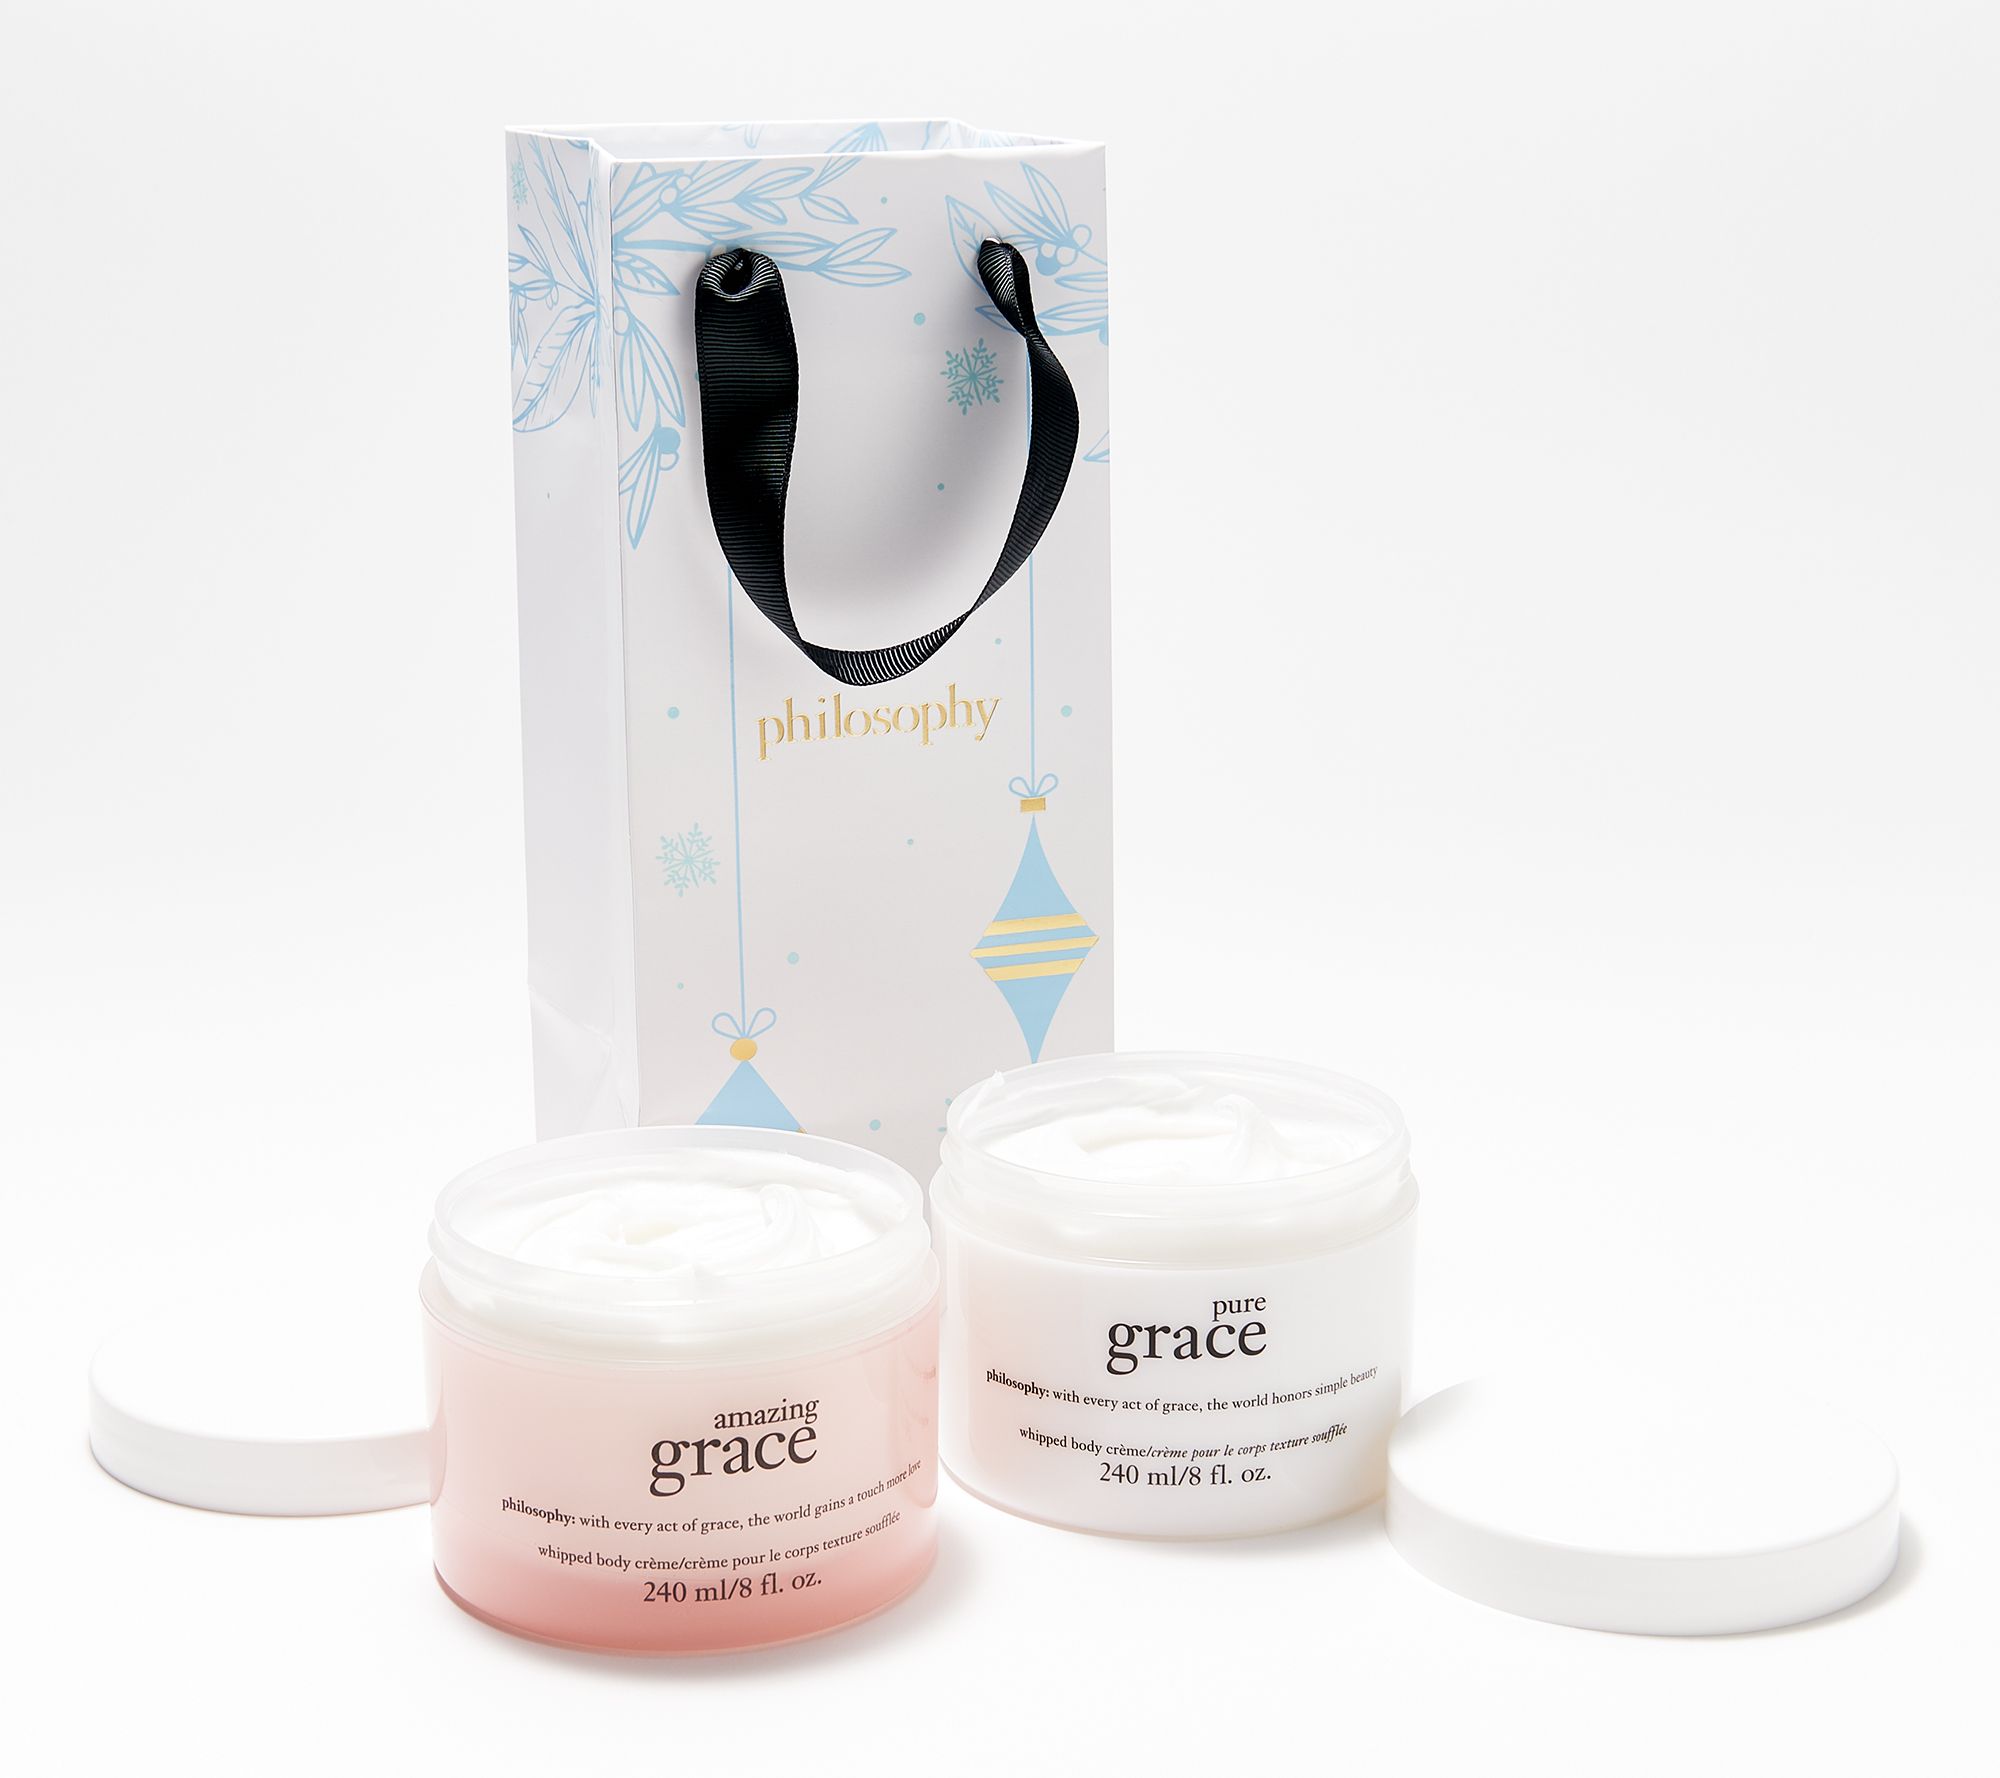 philosophy grace whipped body creme set with gift bag